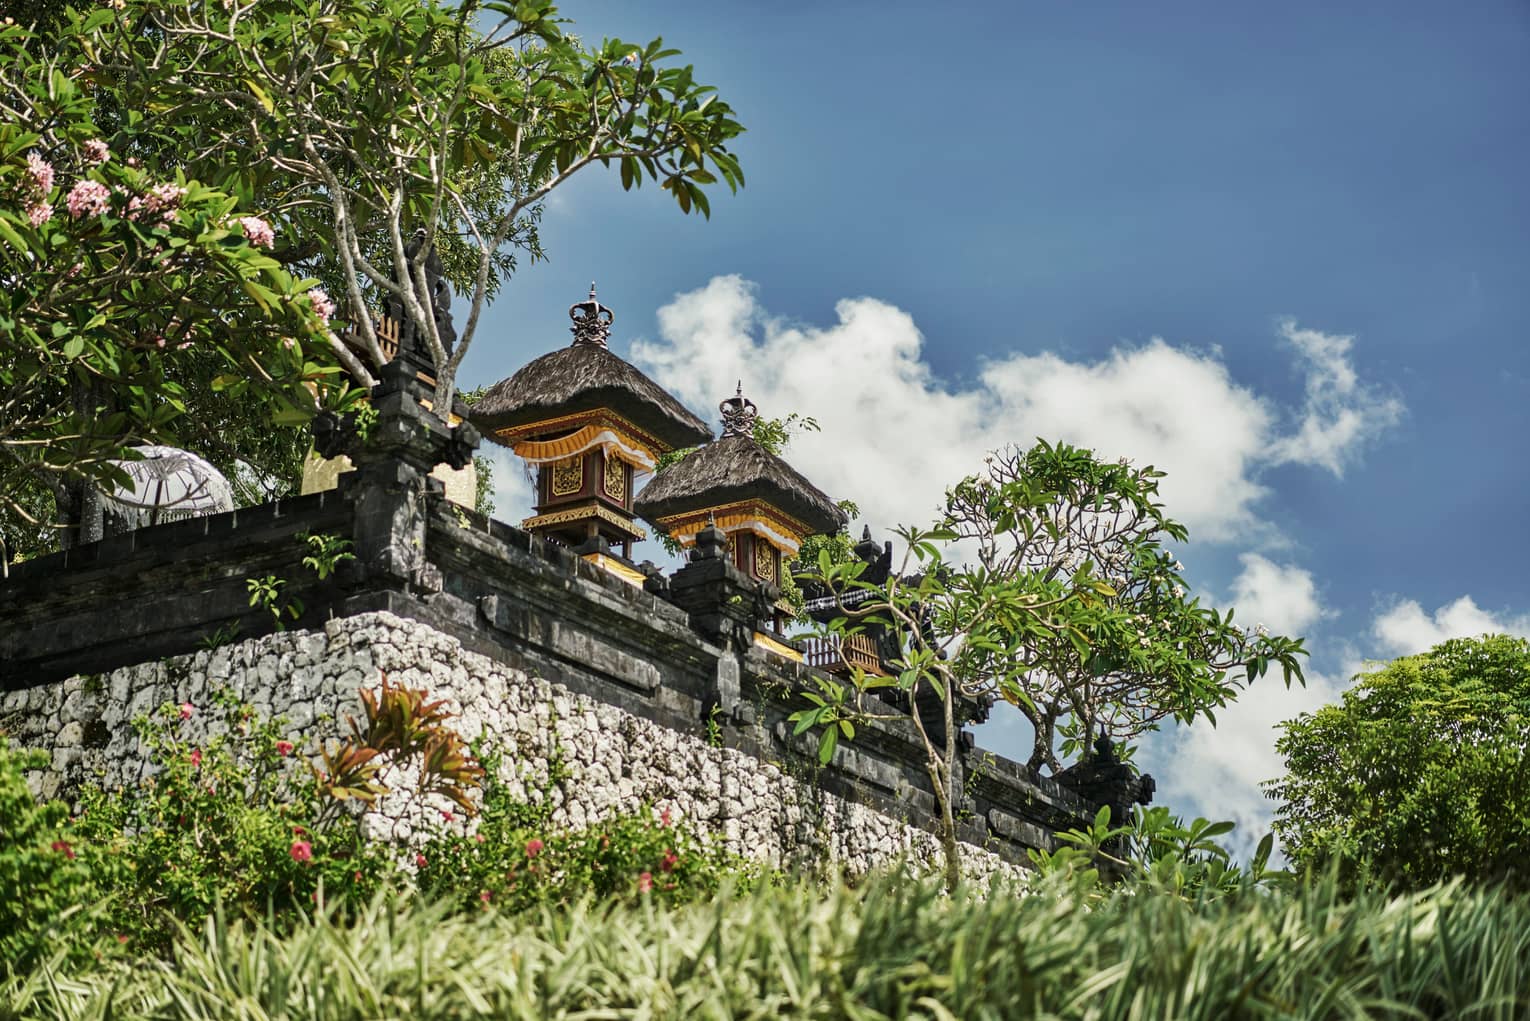 Exterior view of resort temple with stone wall, posts and carvings, tropical trees